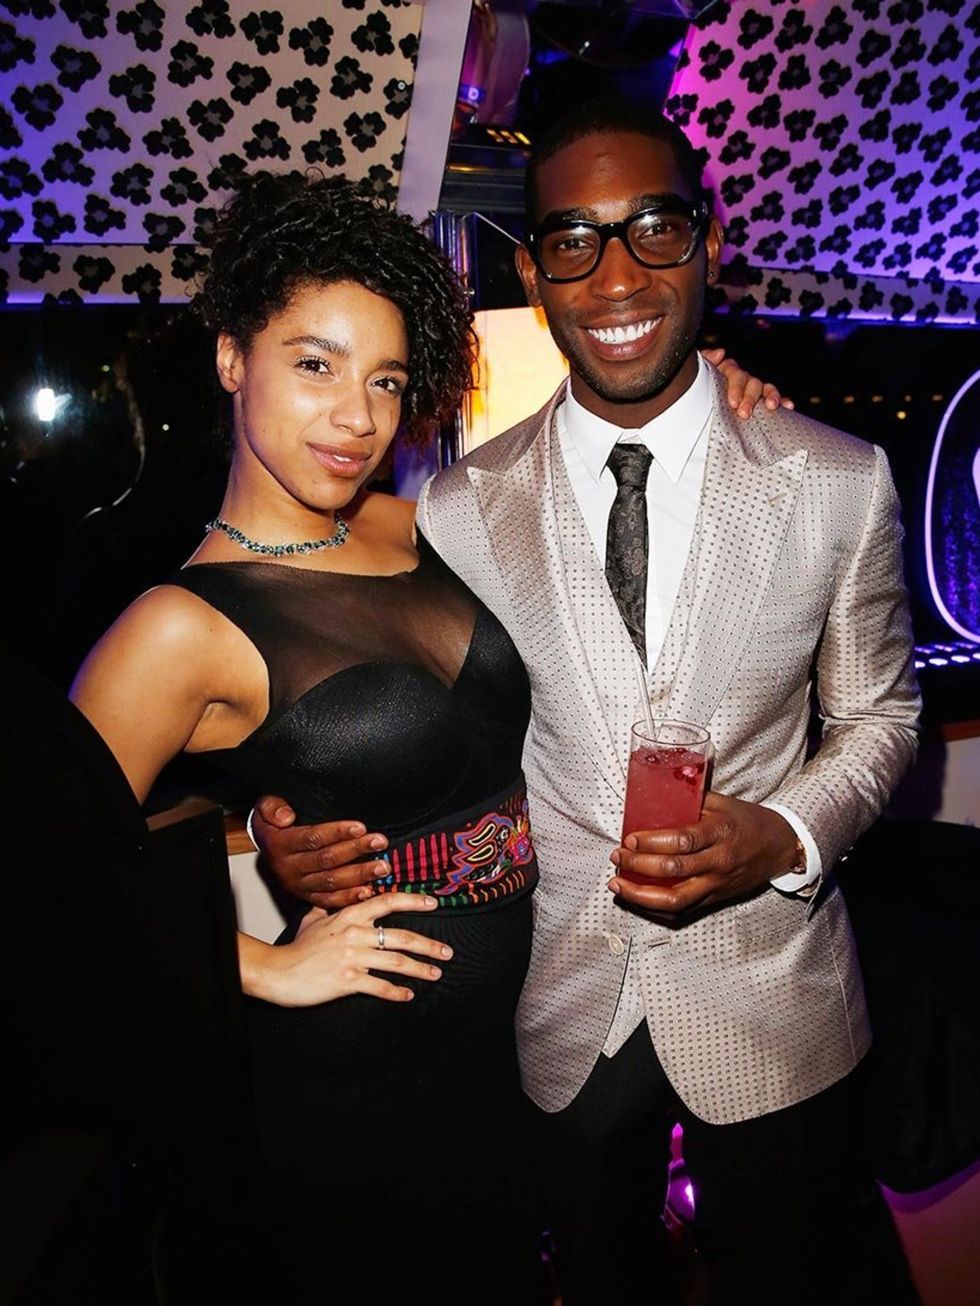 <p>Lianne La Havas and <a href="http://www.elleuk.com/elle-tv/fashion/tinie-tempah-elle-december-issue-video-behind-the-scenes">Tinie Tempah</a> at the Warner Music Group & Belvedere BRITs 2014 after-party.</p>